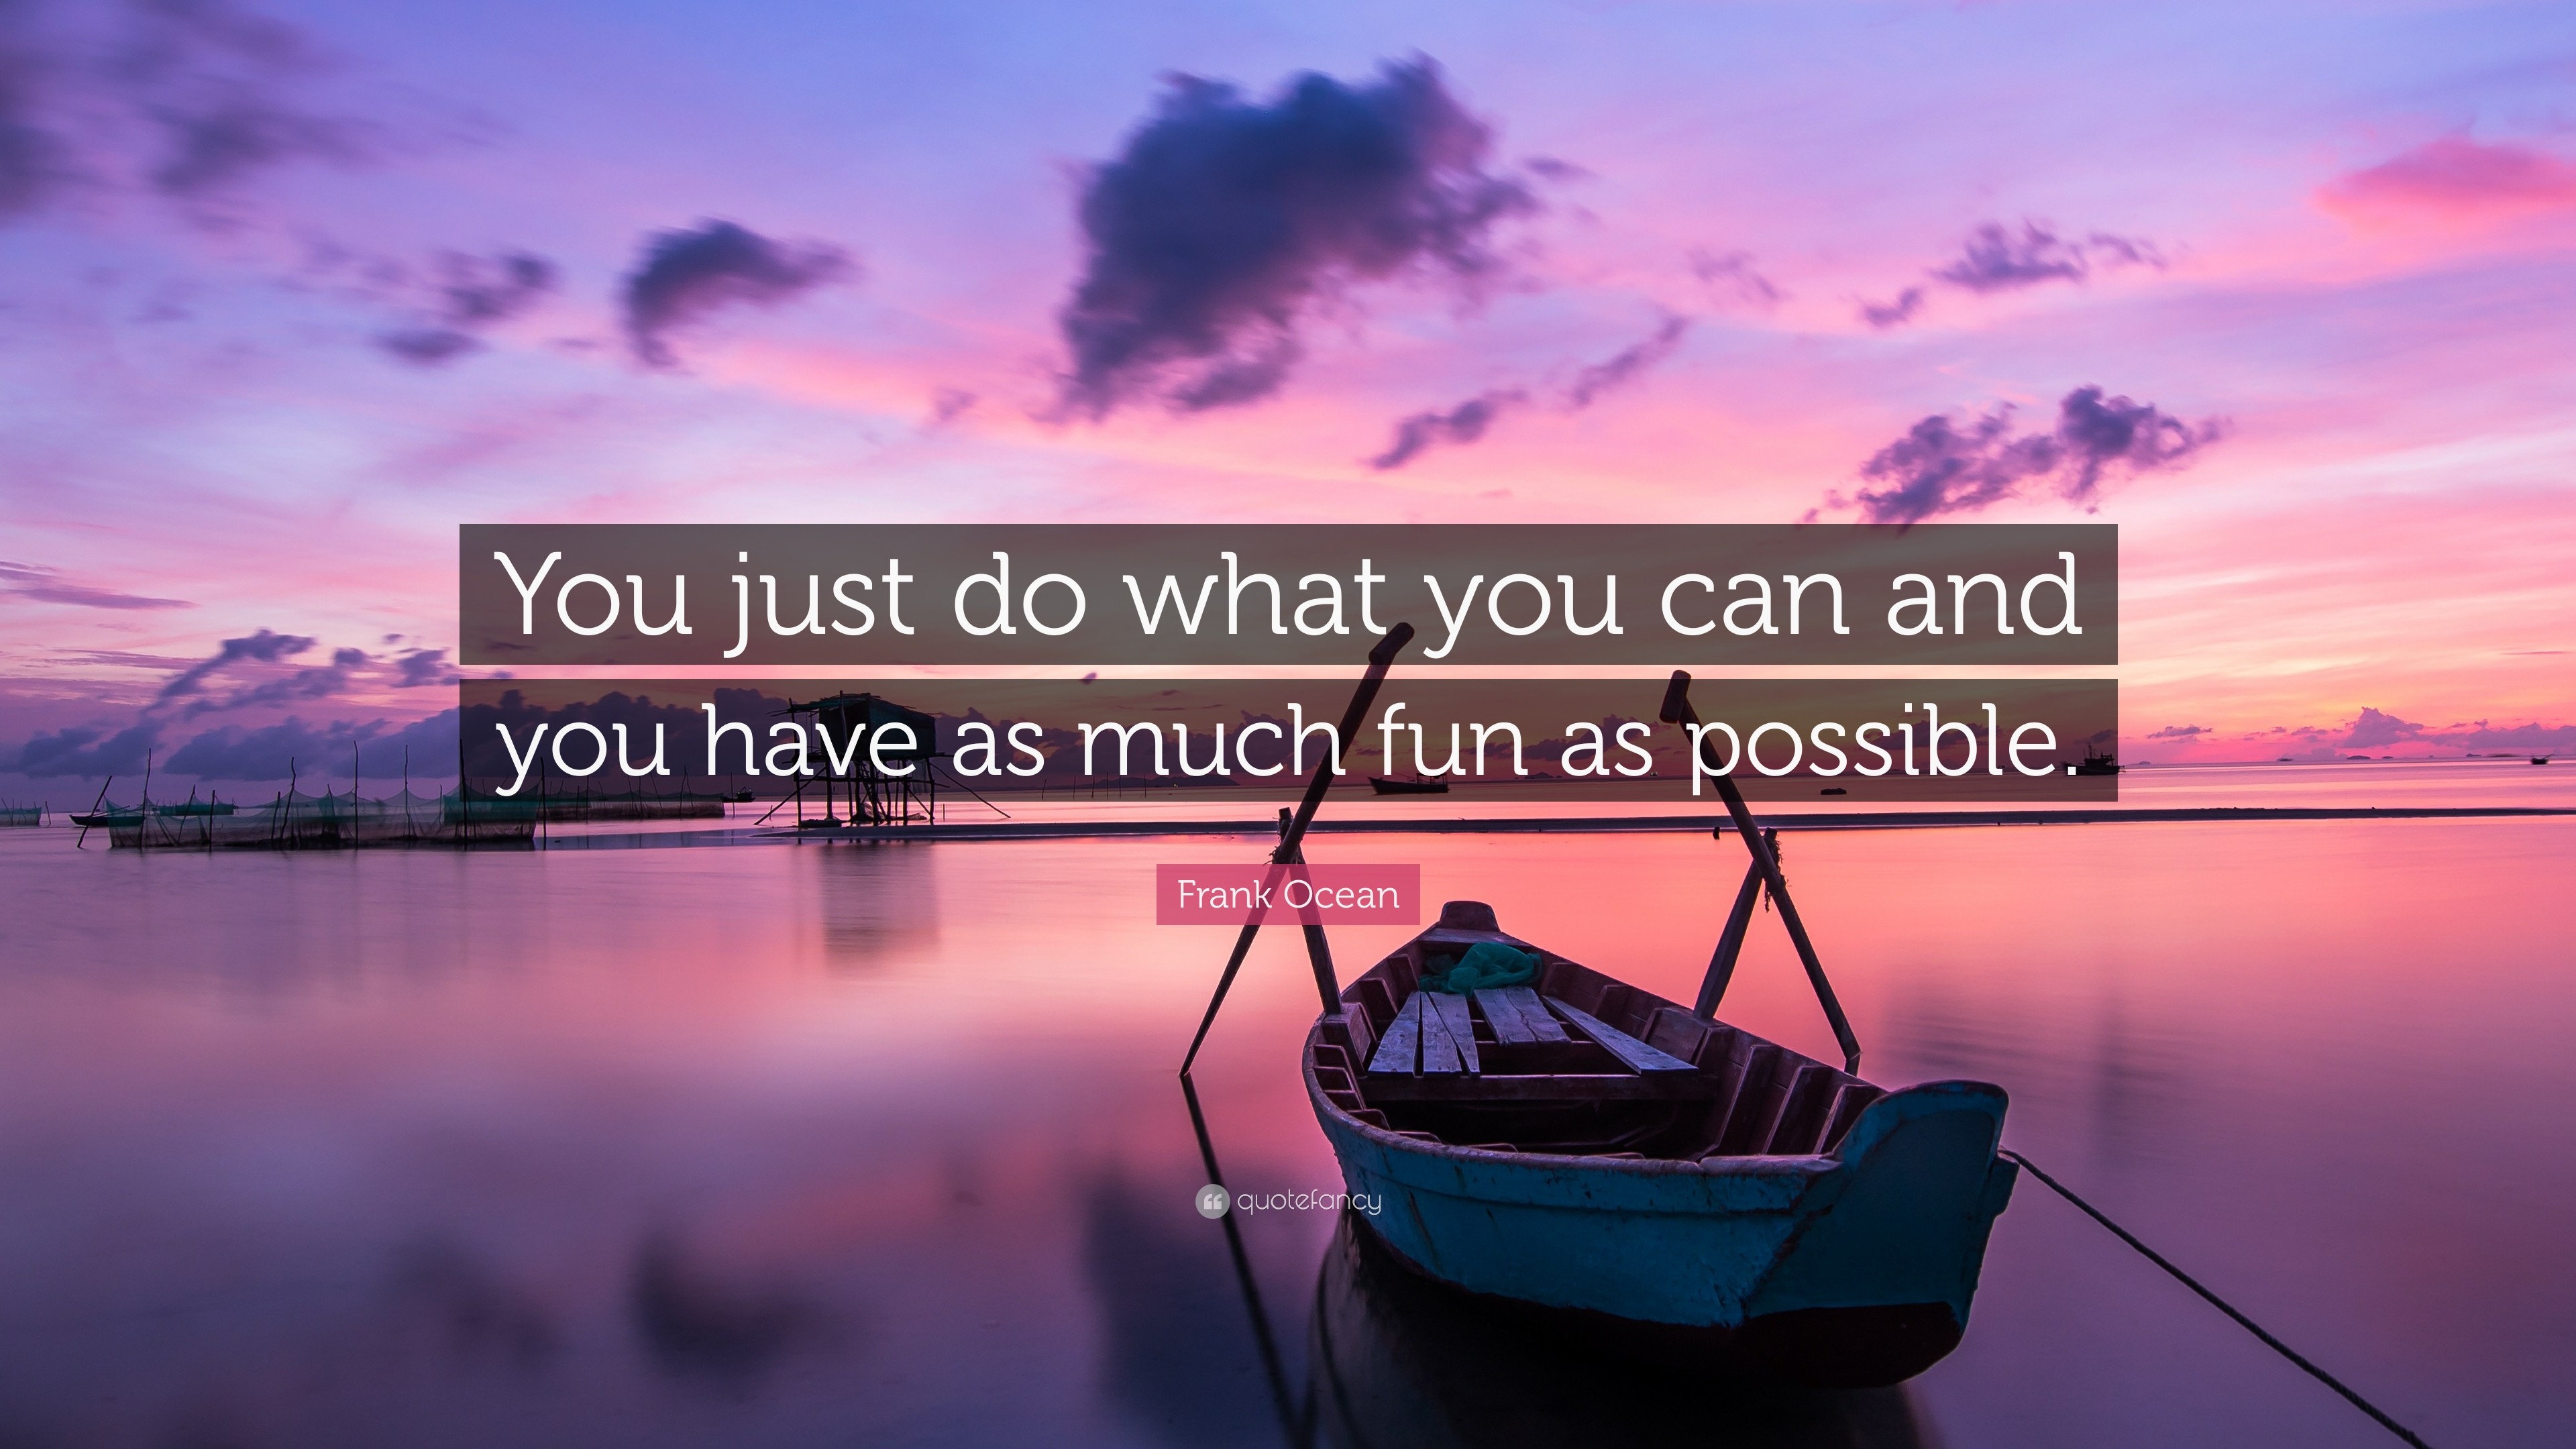 3840x2160 Frank Ocean Quote: “You just do what you can and you have as much